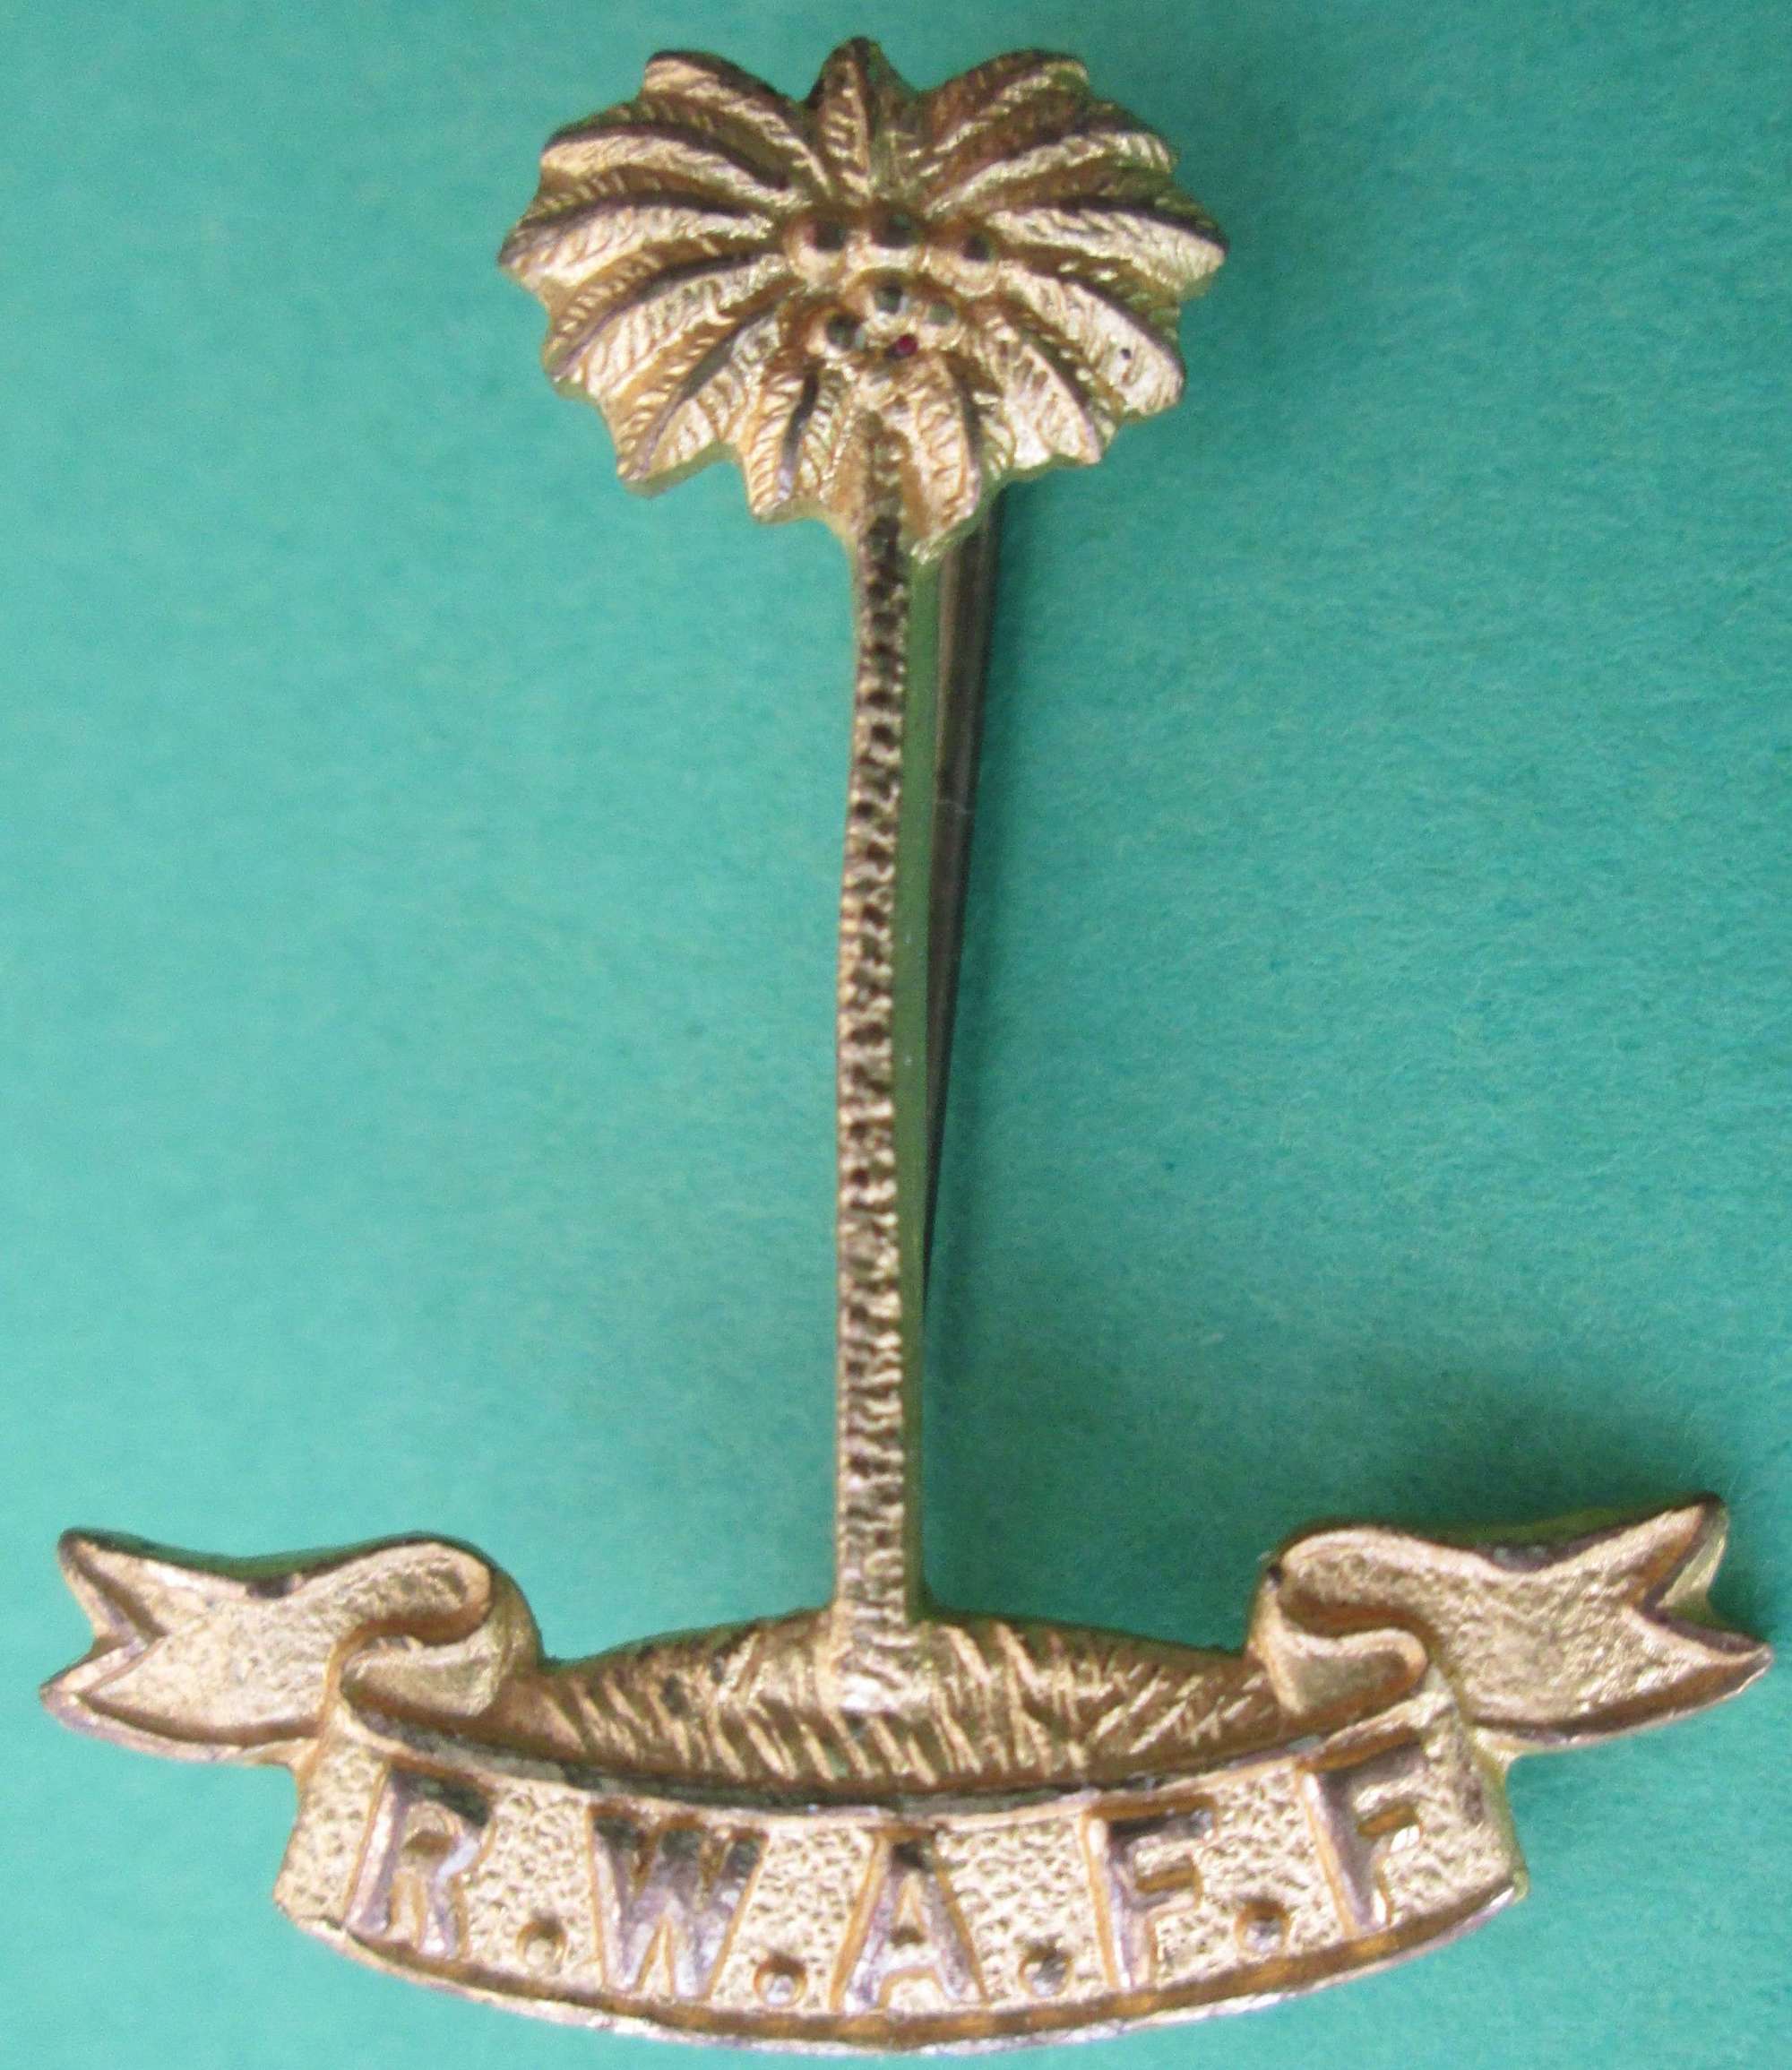 A Royal West African frontier sweetheart pin badge